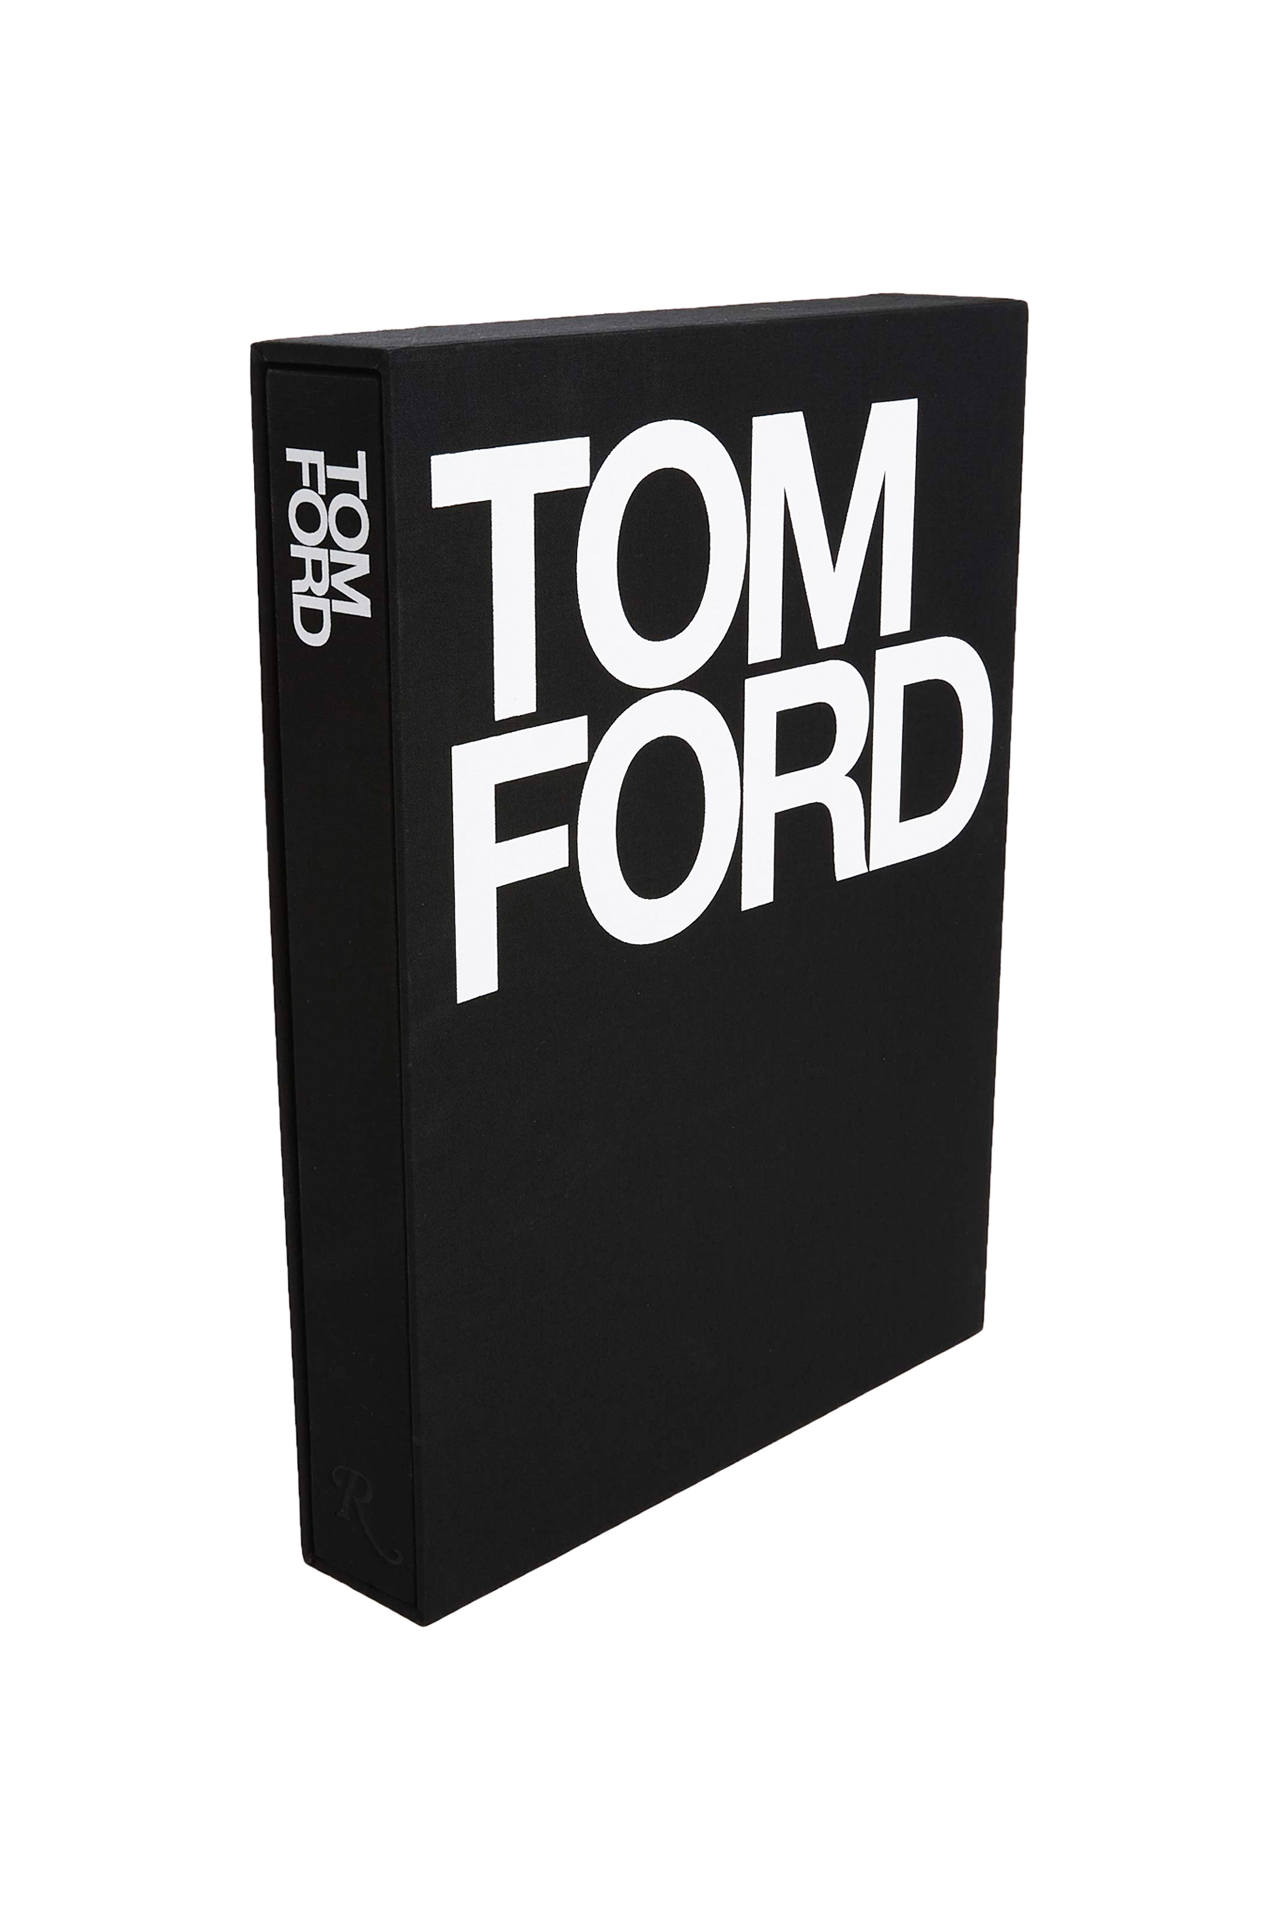 Tom Ford Book Angled Image (6642190680179)